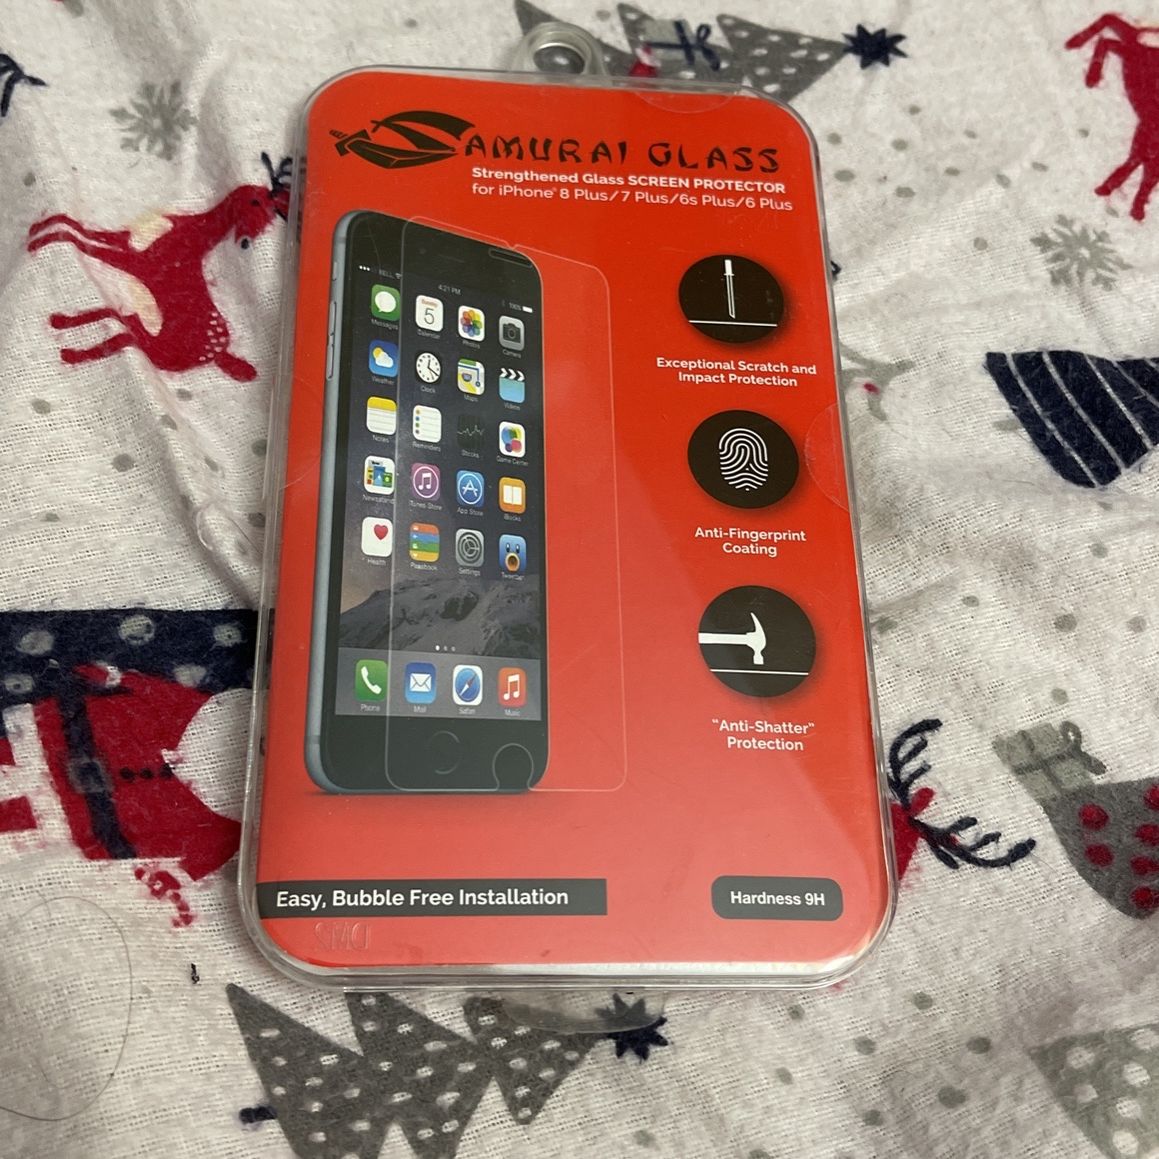 Screen Protector For Iphone 7 Plus -$5 obo